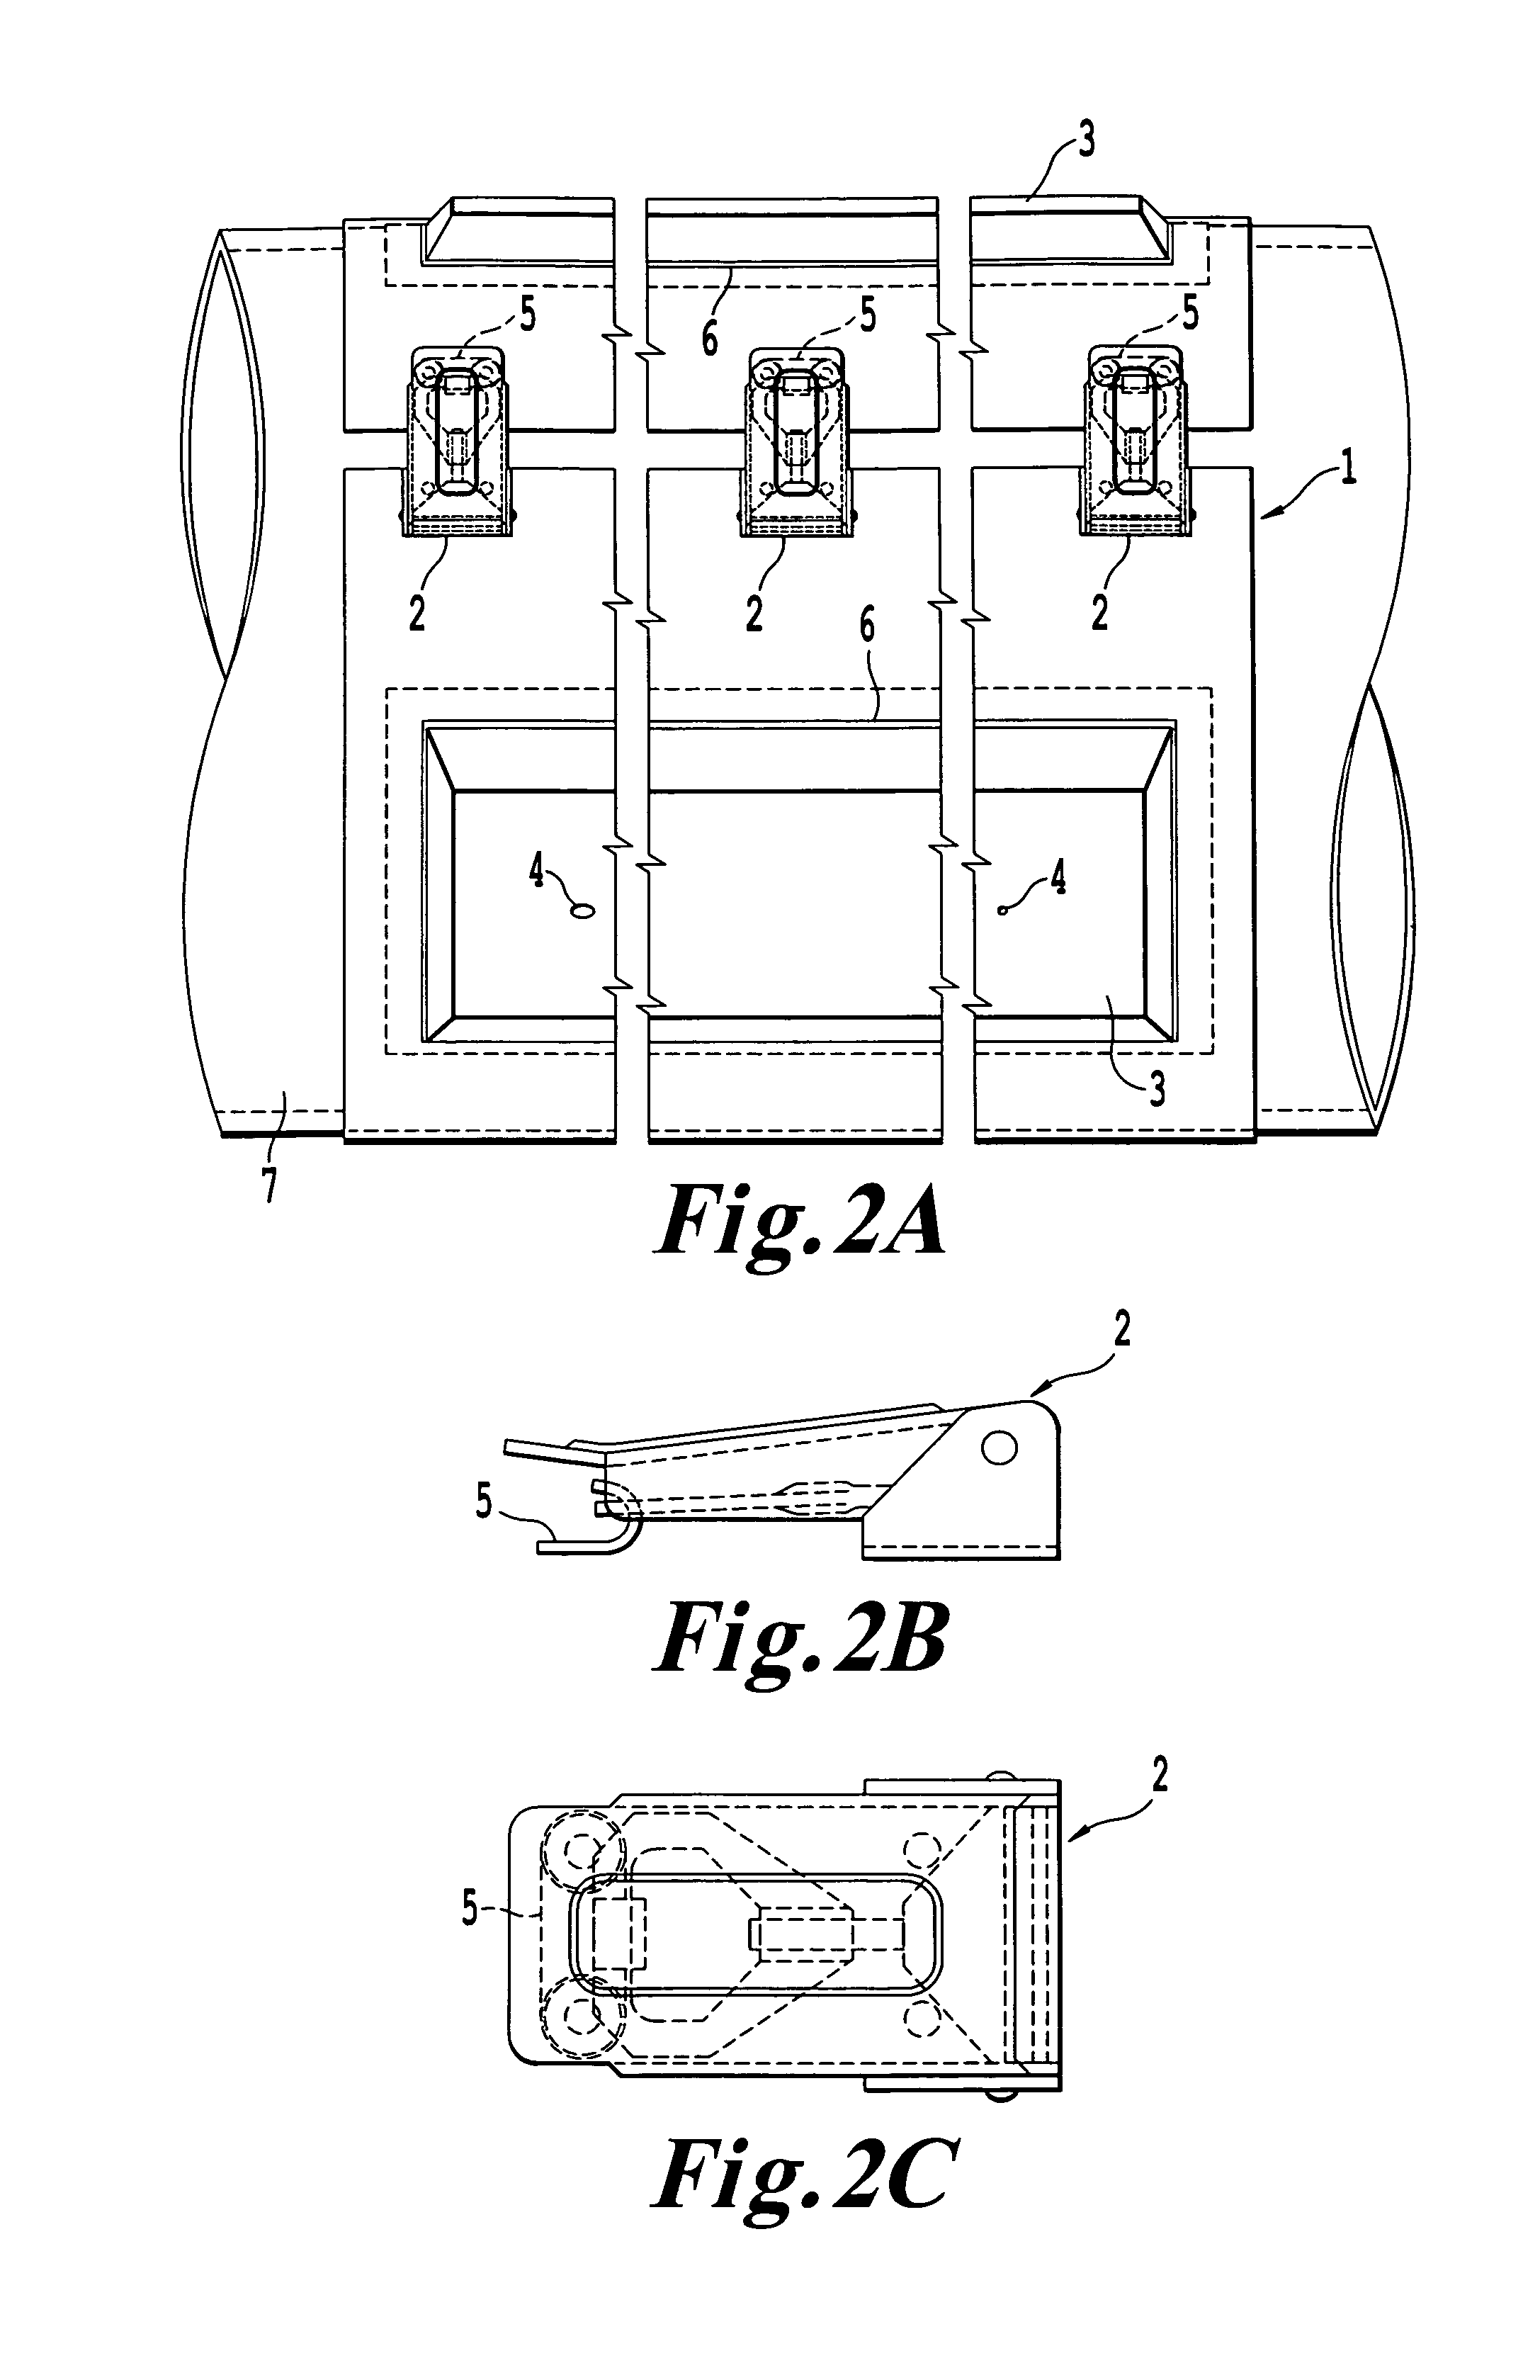 Method for making centralizers for centralising a tight fitting casing in a borehole